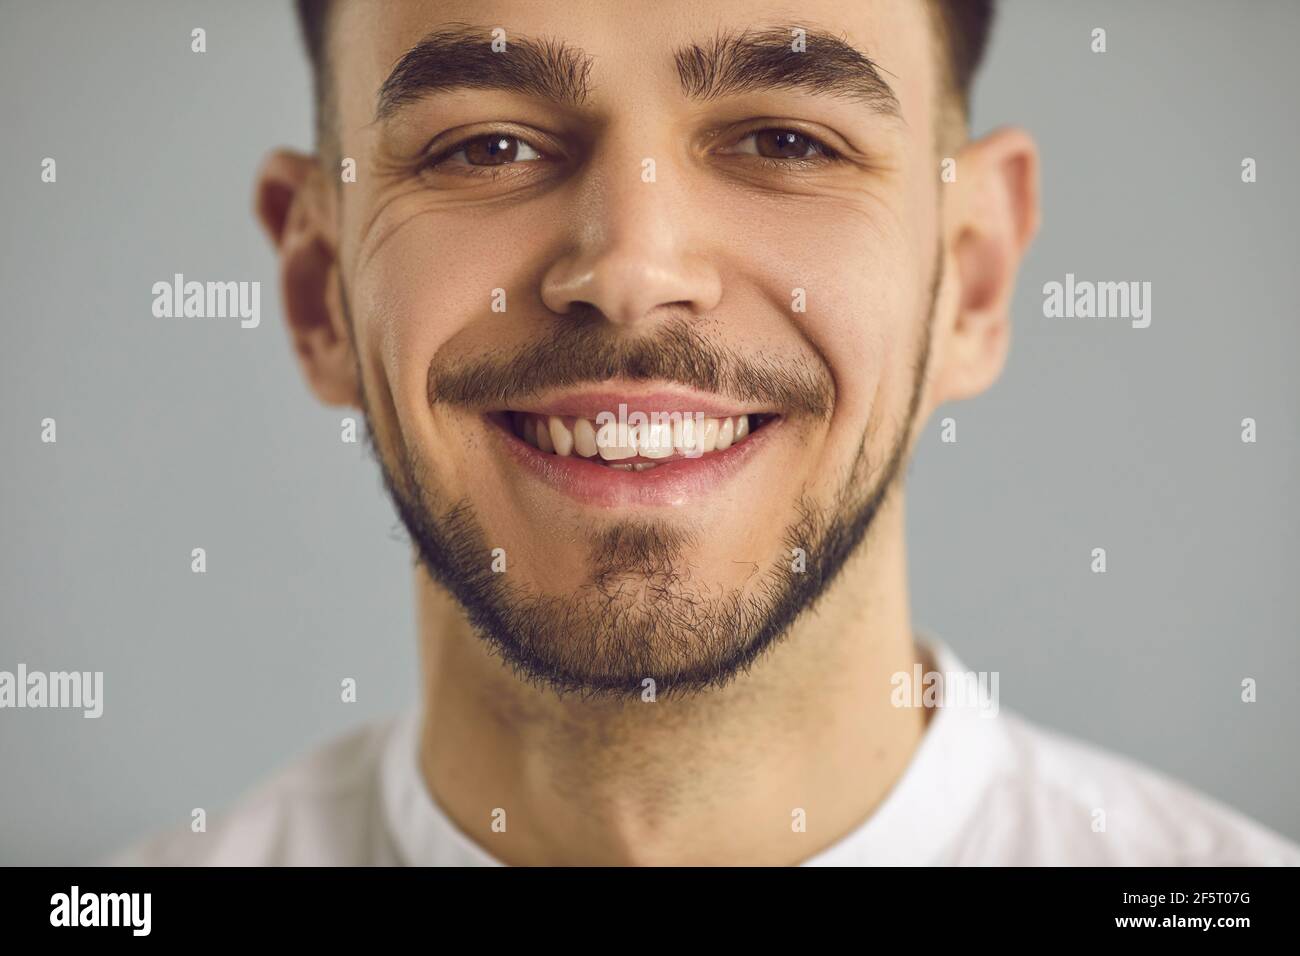 Closeup studio portrait of a happy young Caucasian man with a friendly open smile Stock Photo